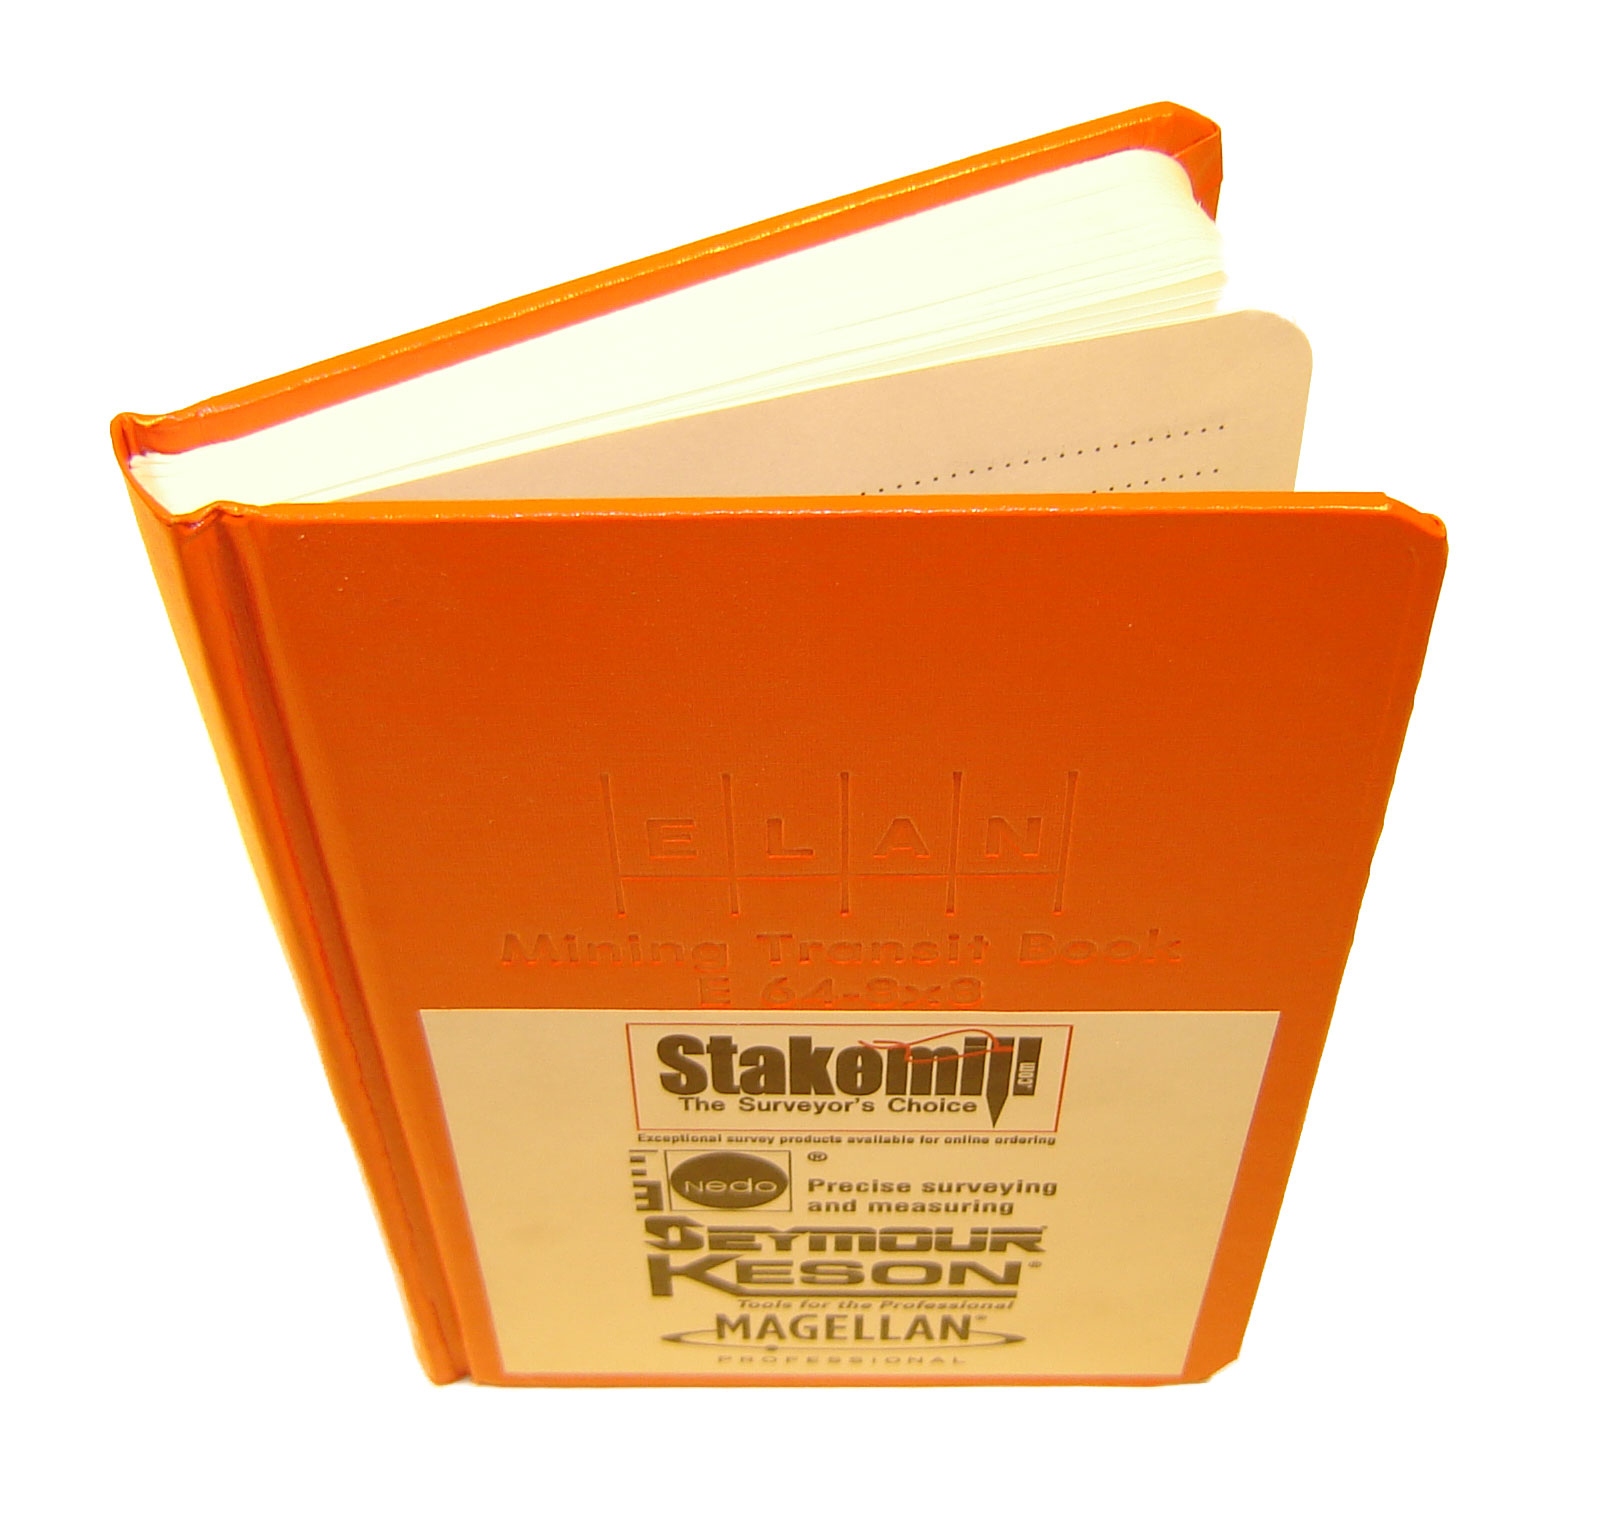 8152-55 for sale online SOKKIA Yellow Level Book 815255 No 